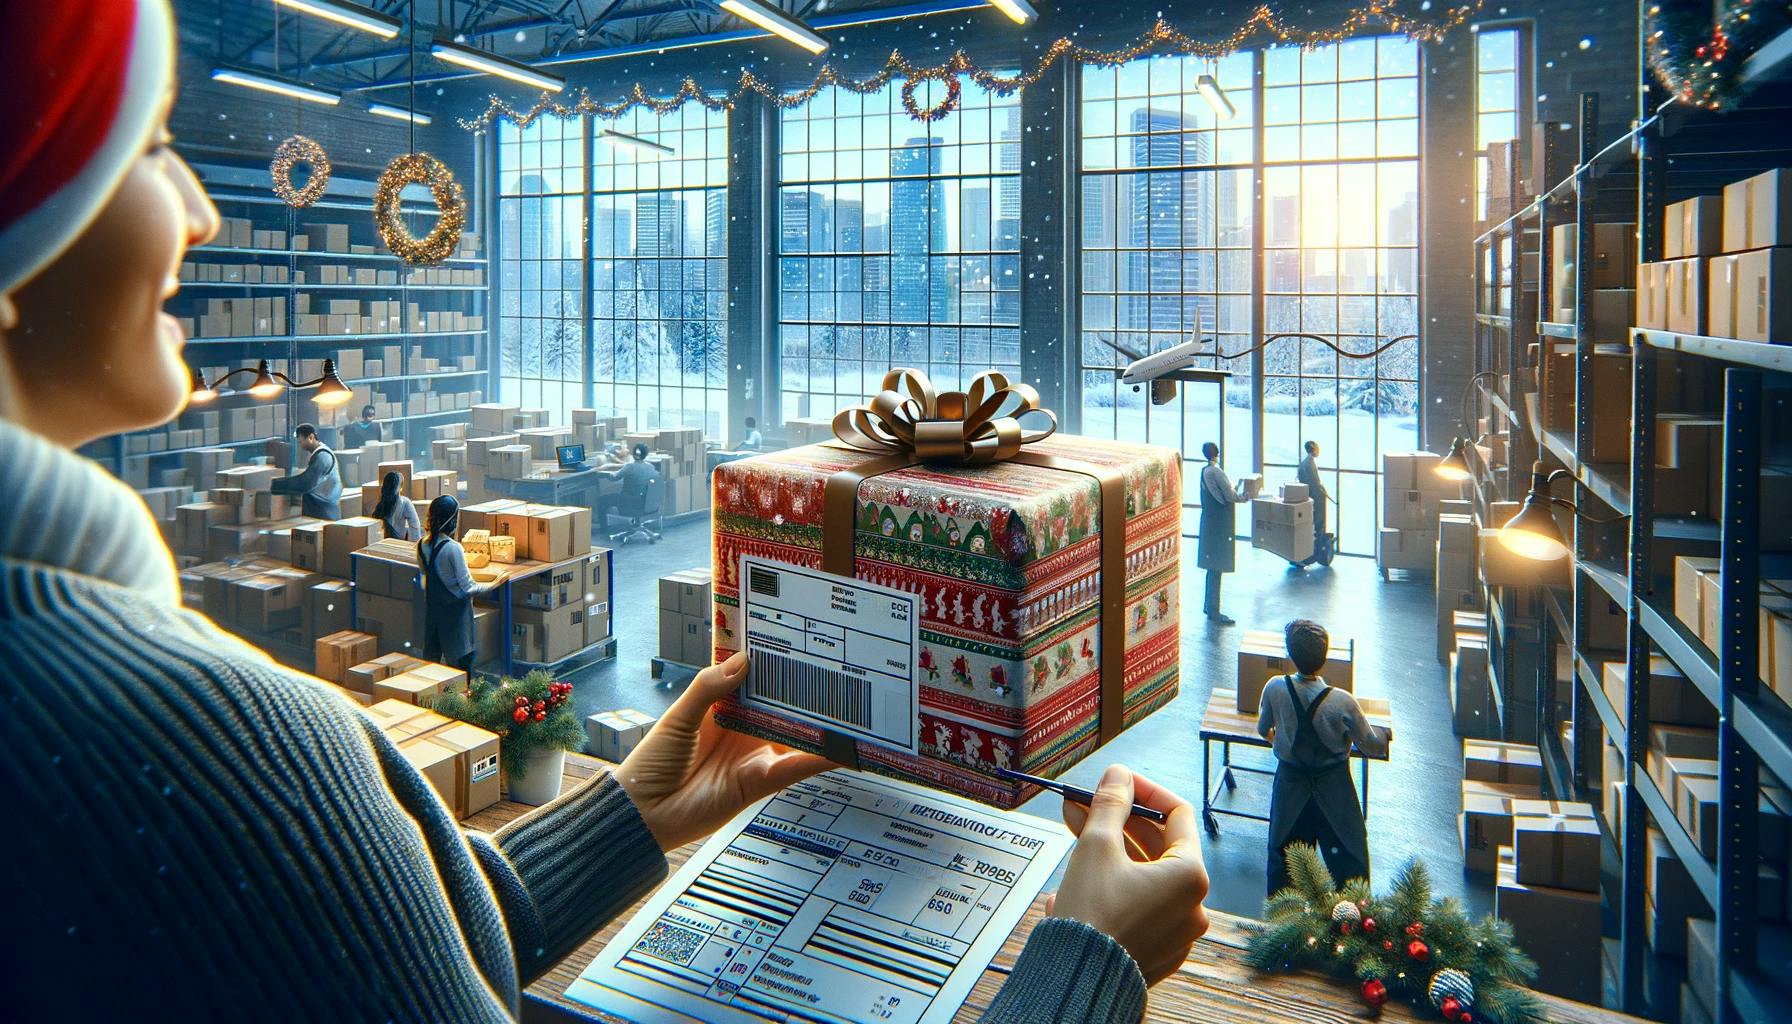 showing a package getting ready to be shipped internationally during Christmas in an urban setting